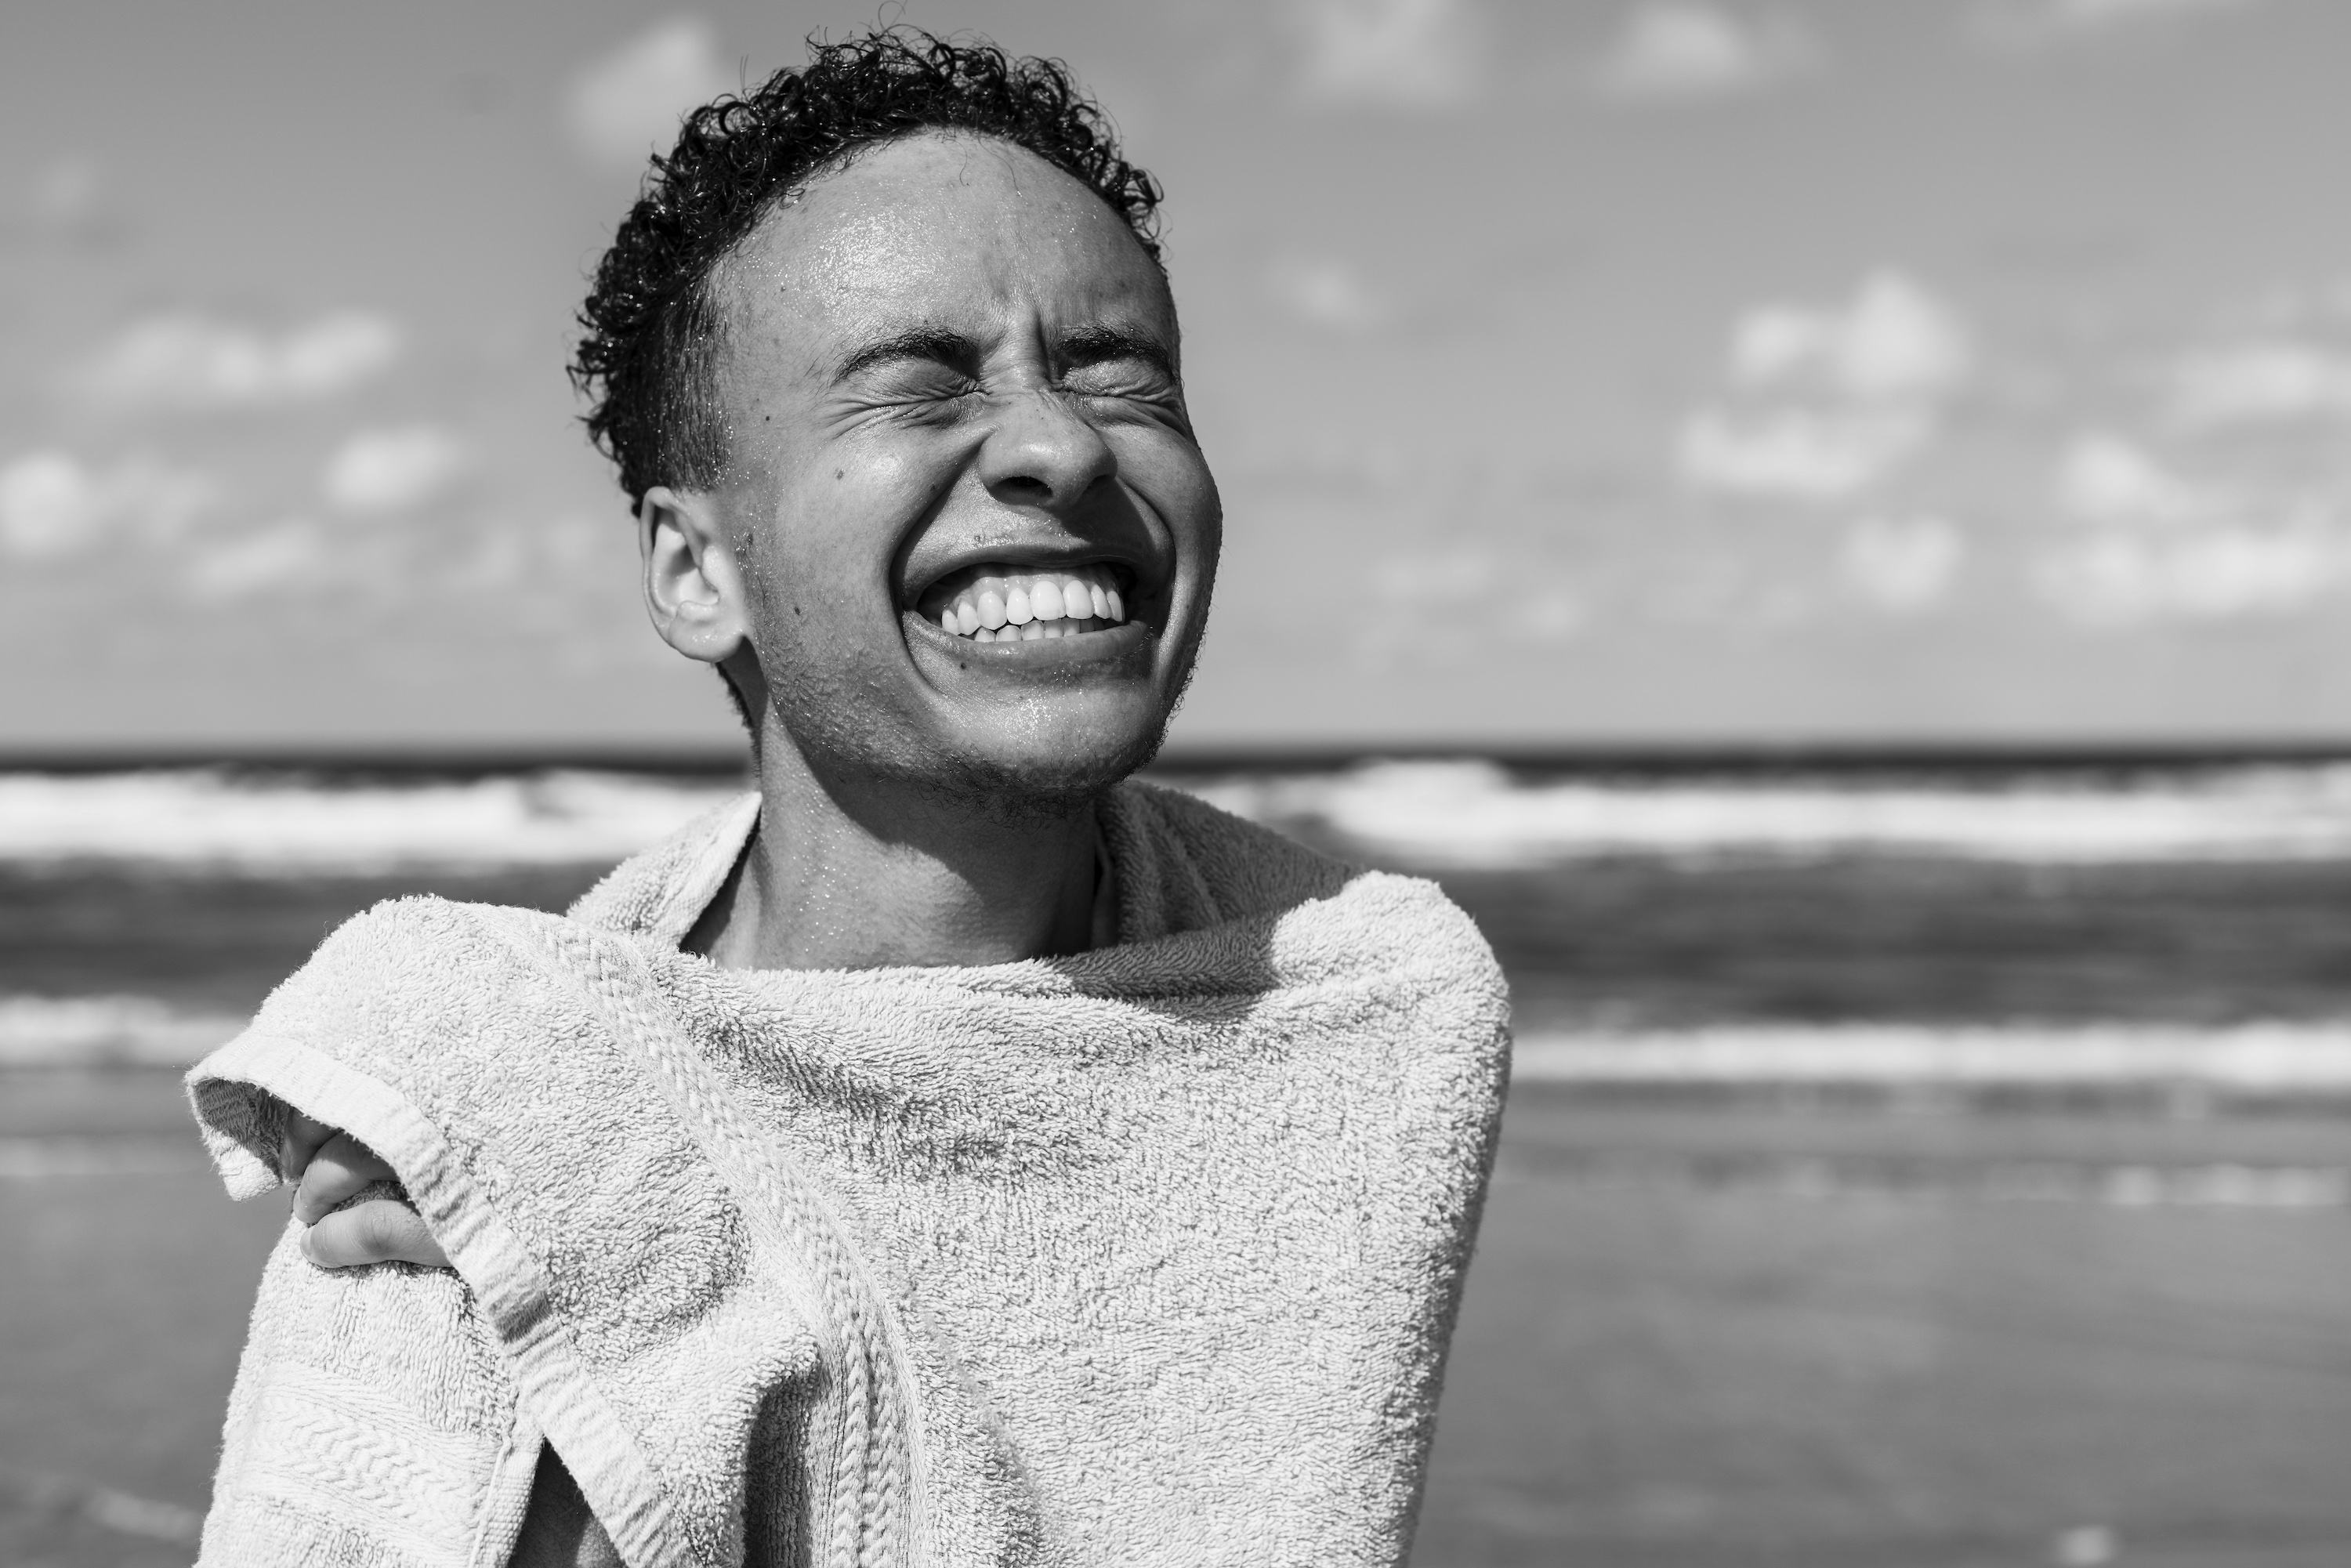 A black-and-white portrait of the photographer, Marvel Harris, on the beach, smiling brightly with his eyes closed, holding a towel around him.